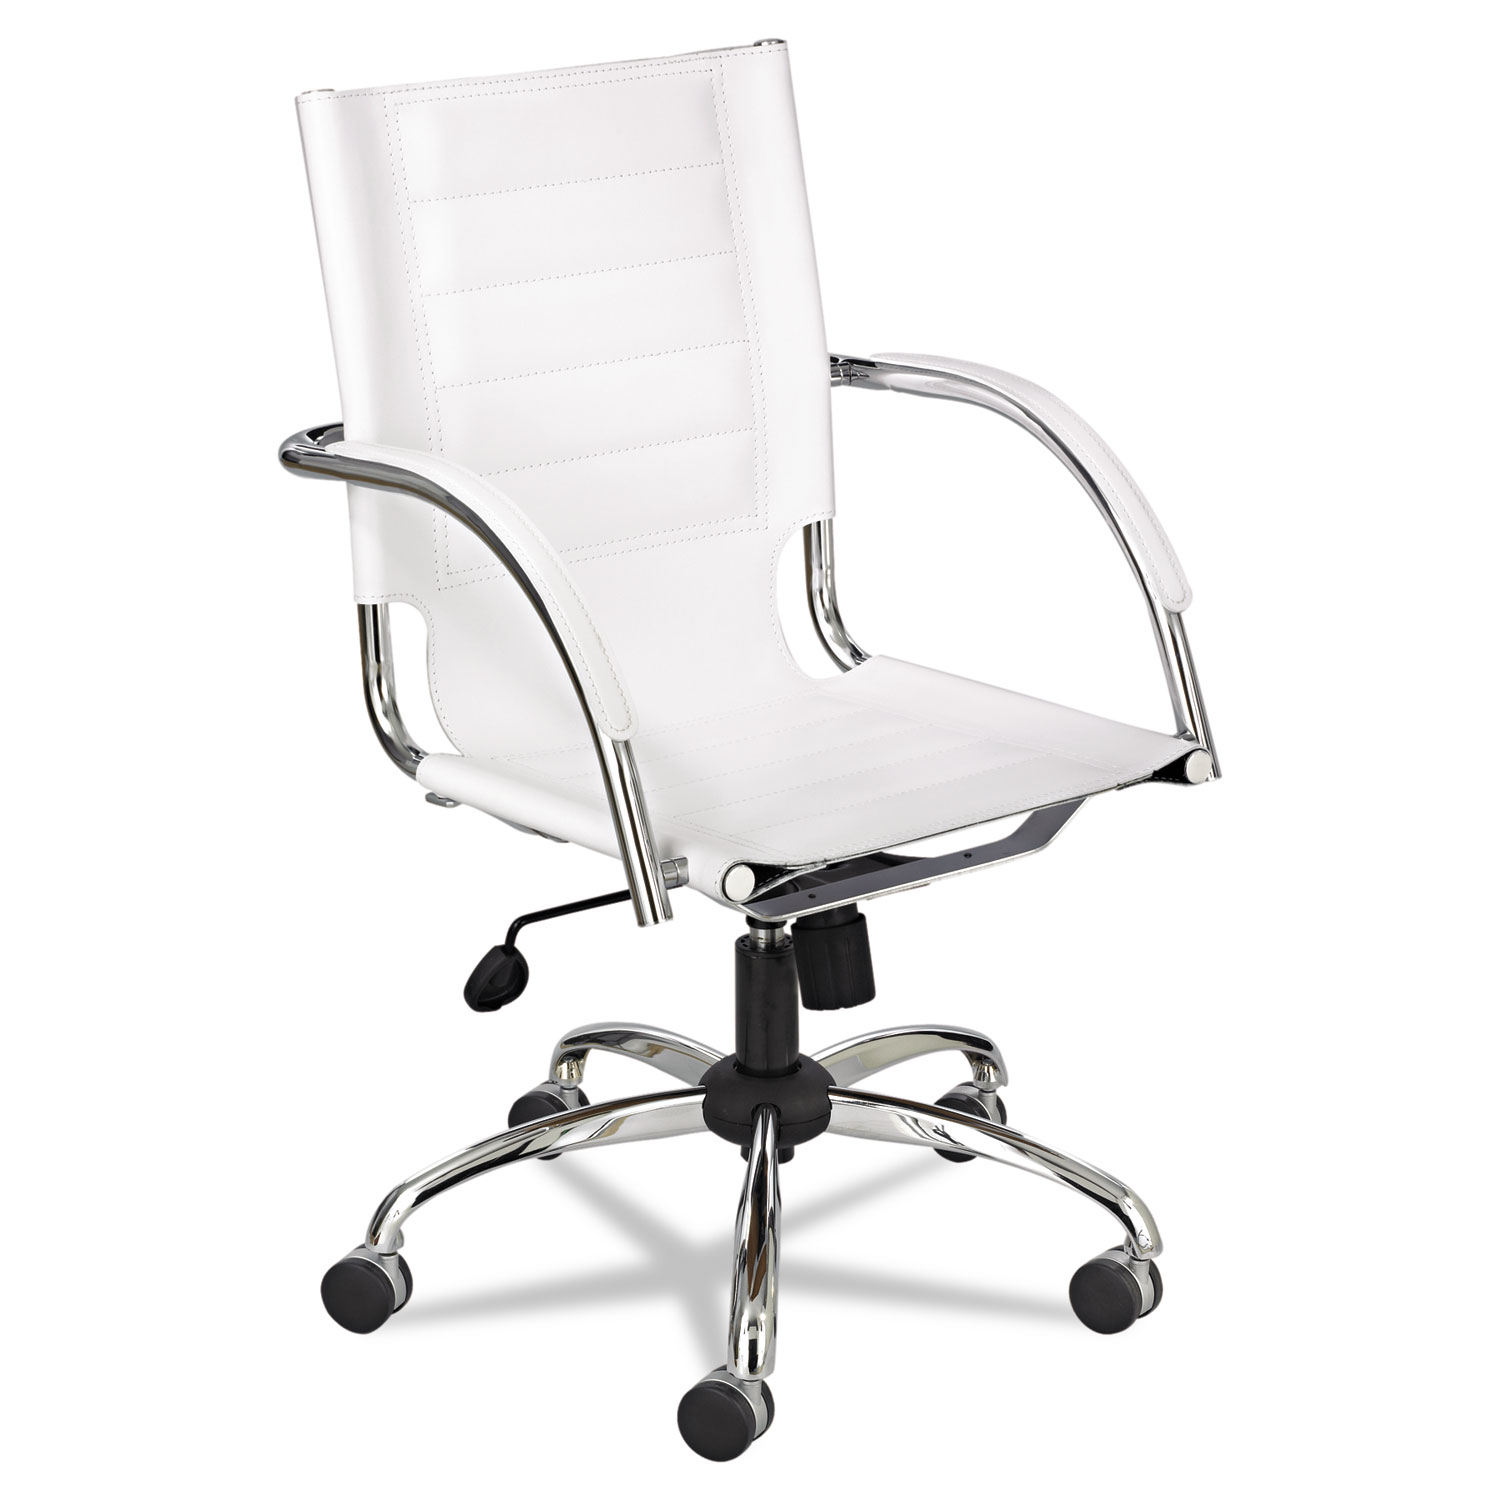 Flaunt Series Mid-Back Managers Chair, White Leather/Chrome